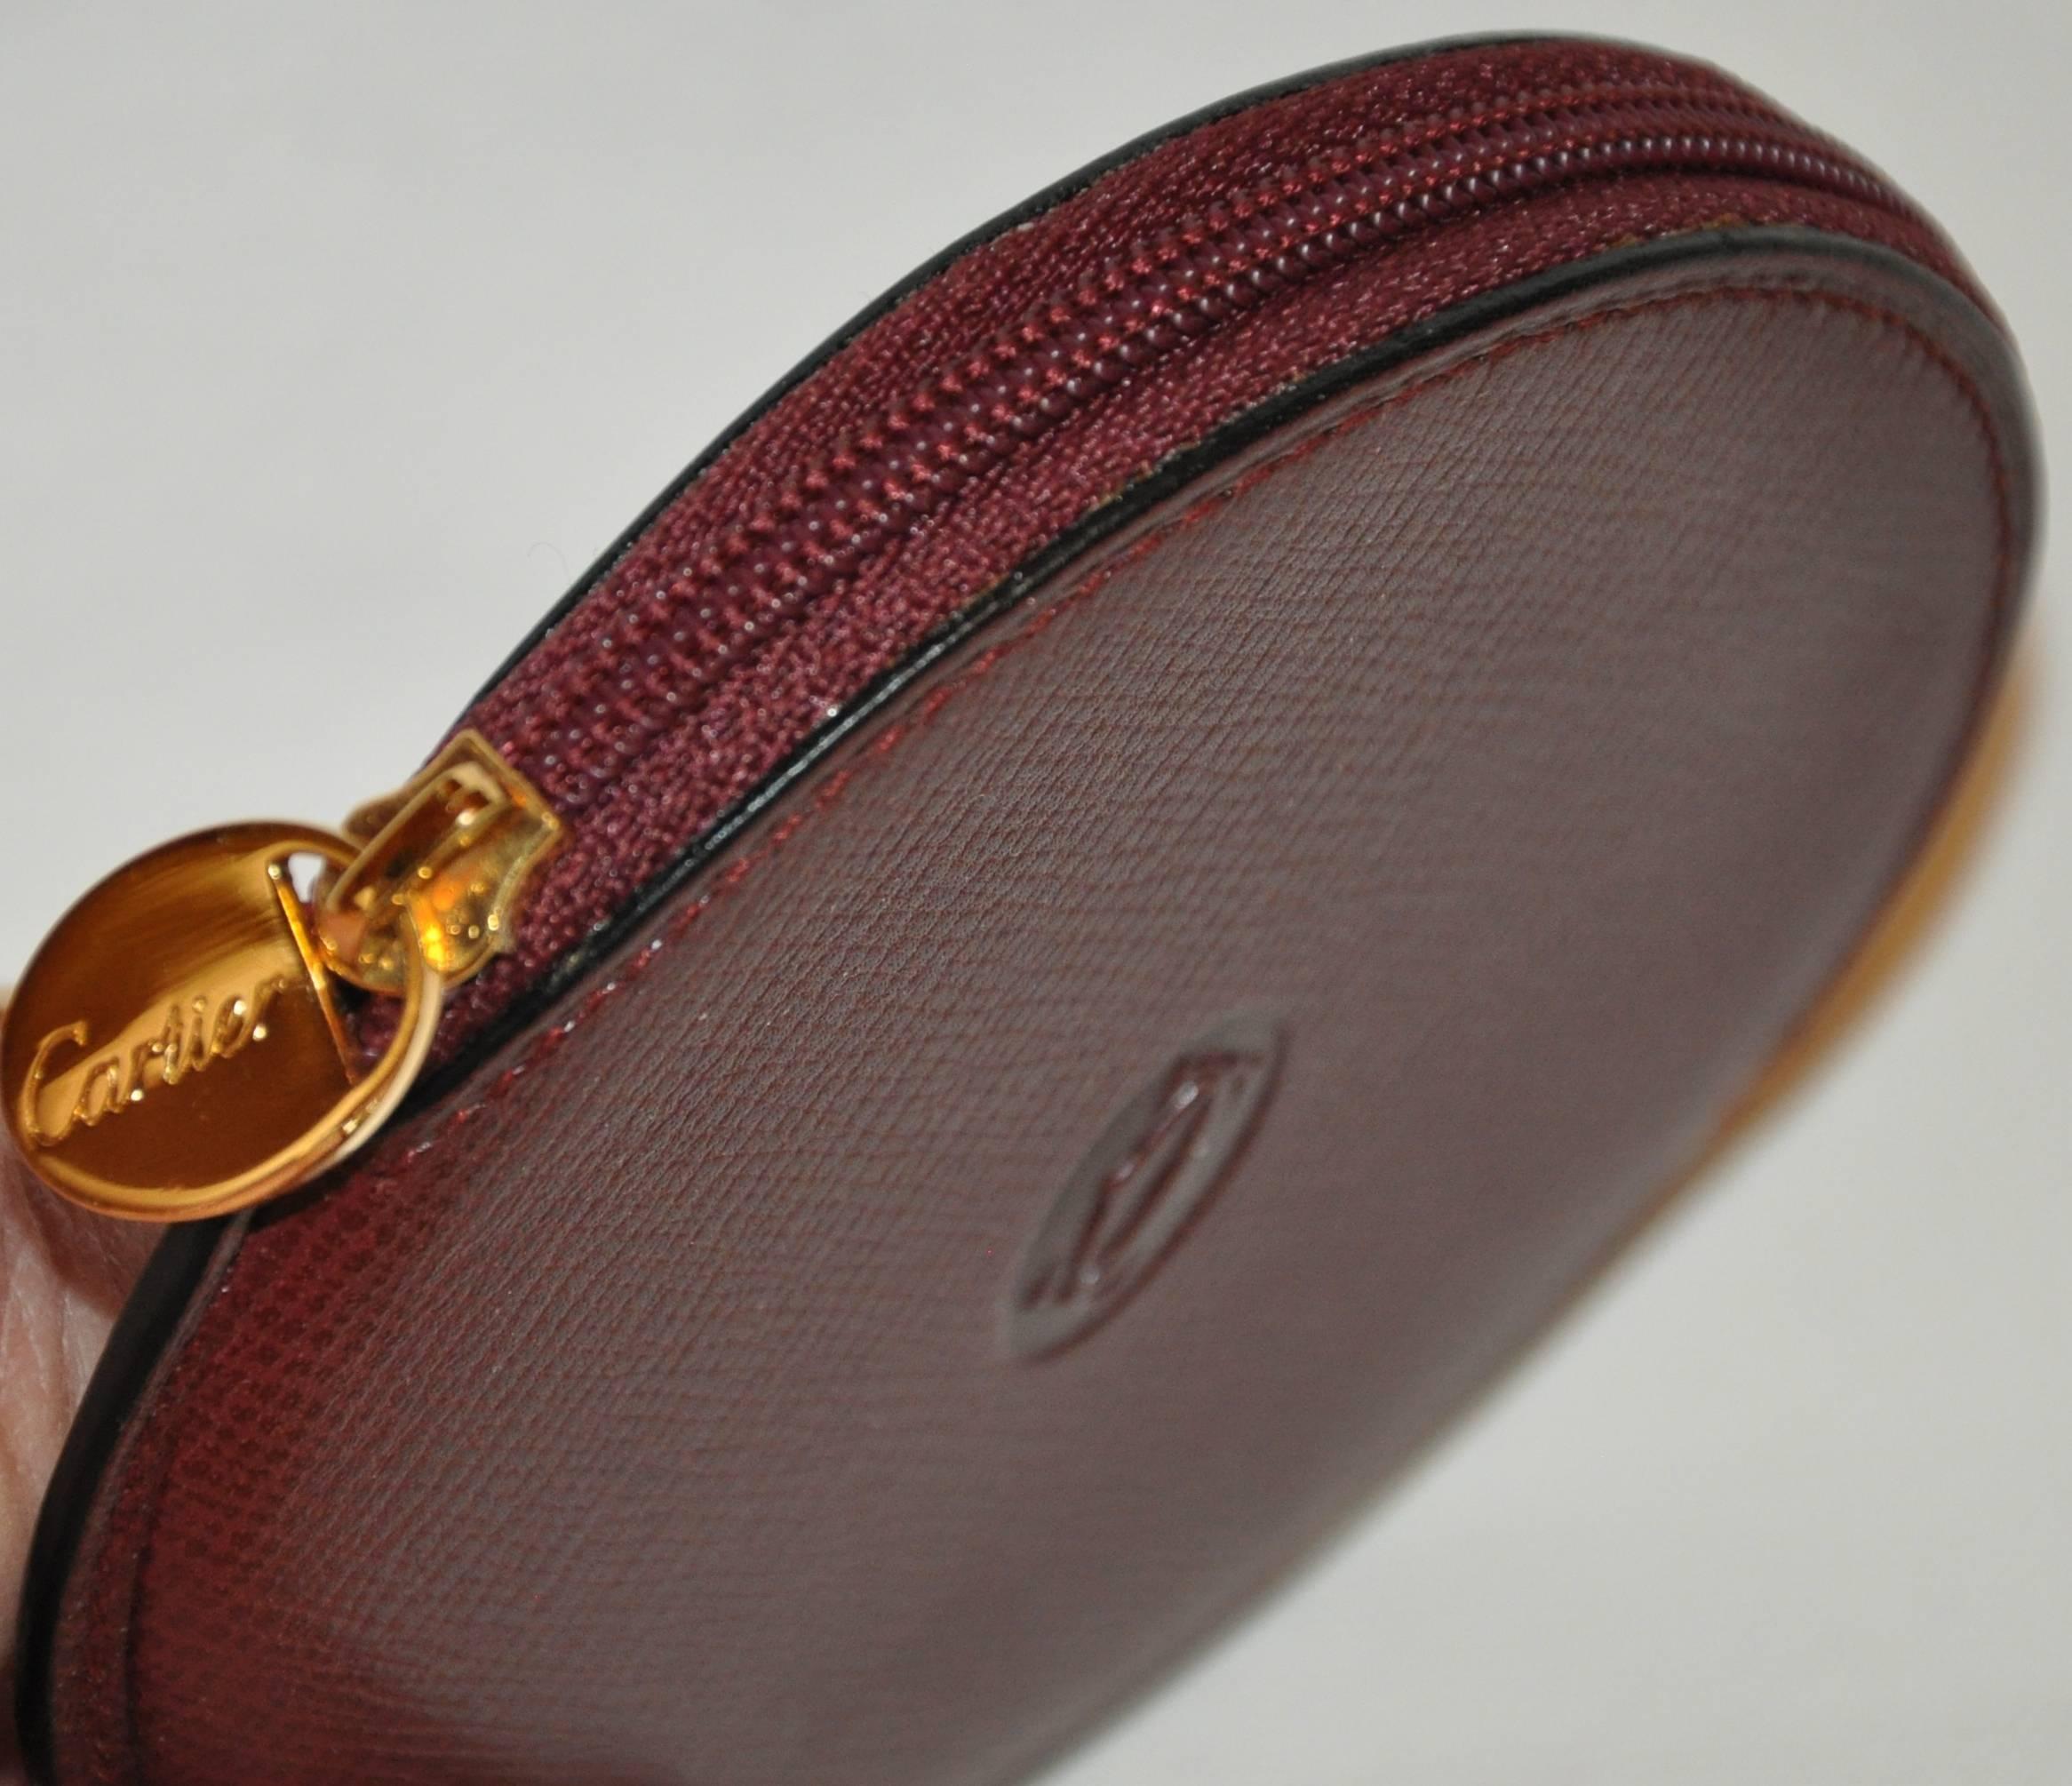        Cartier signature burgundy textured calfskin zippered top change purse, is accented with gold-tone hardware with their signature embossed logo at the center. The change purse measures 3 1/4 inches by 4 inches. The circumference measures 12